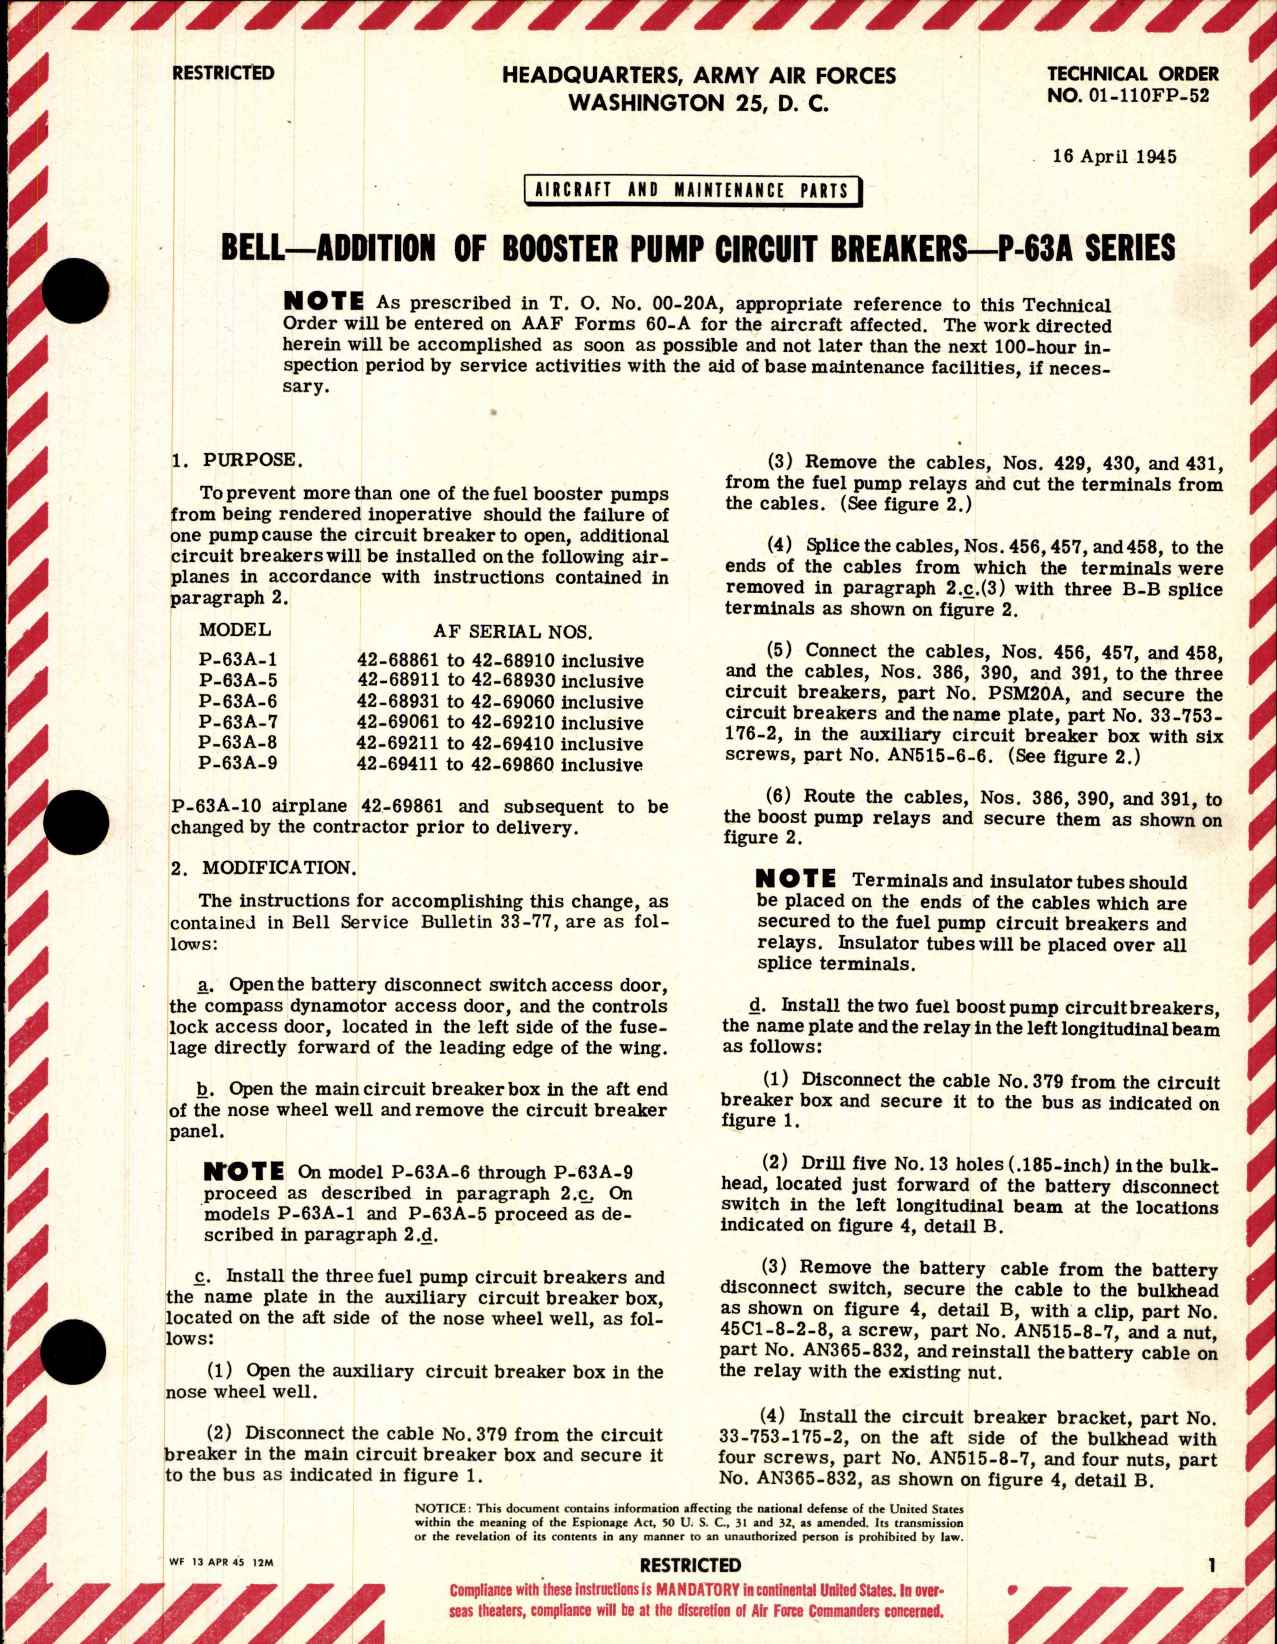 Sample page 1 from AirCorps Library document: Addition of Booster Pump Circuit Breakers for P-63A Series